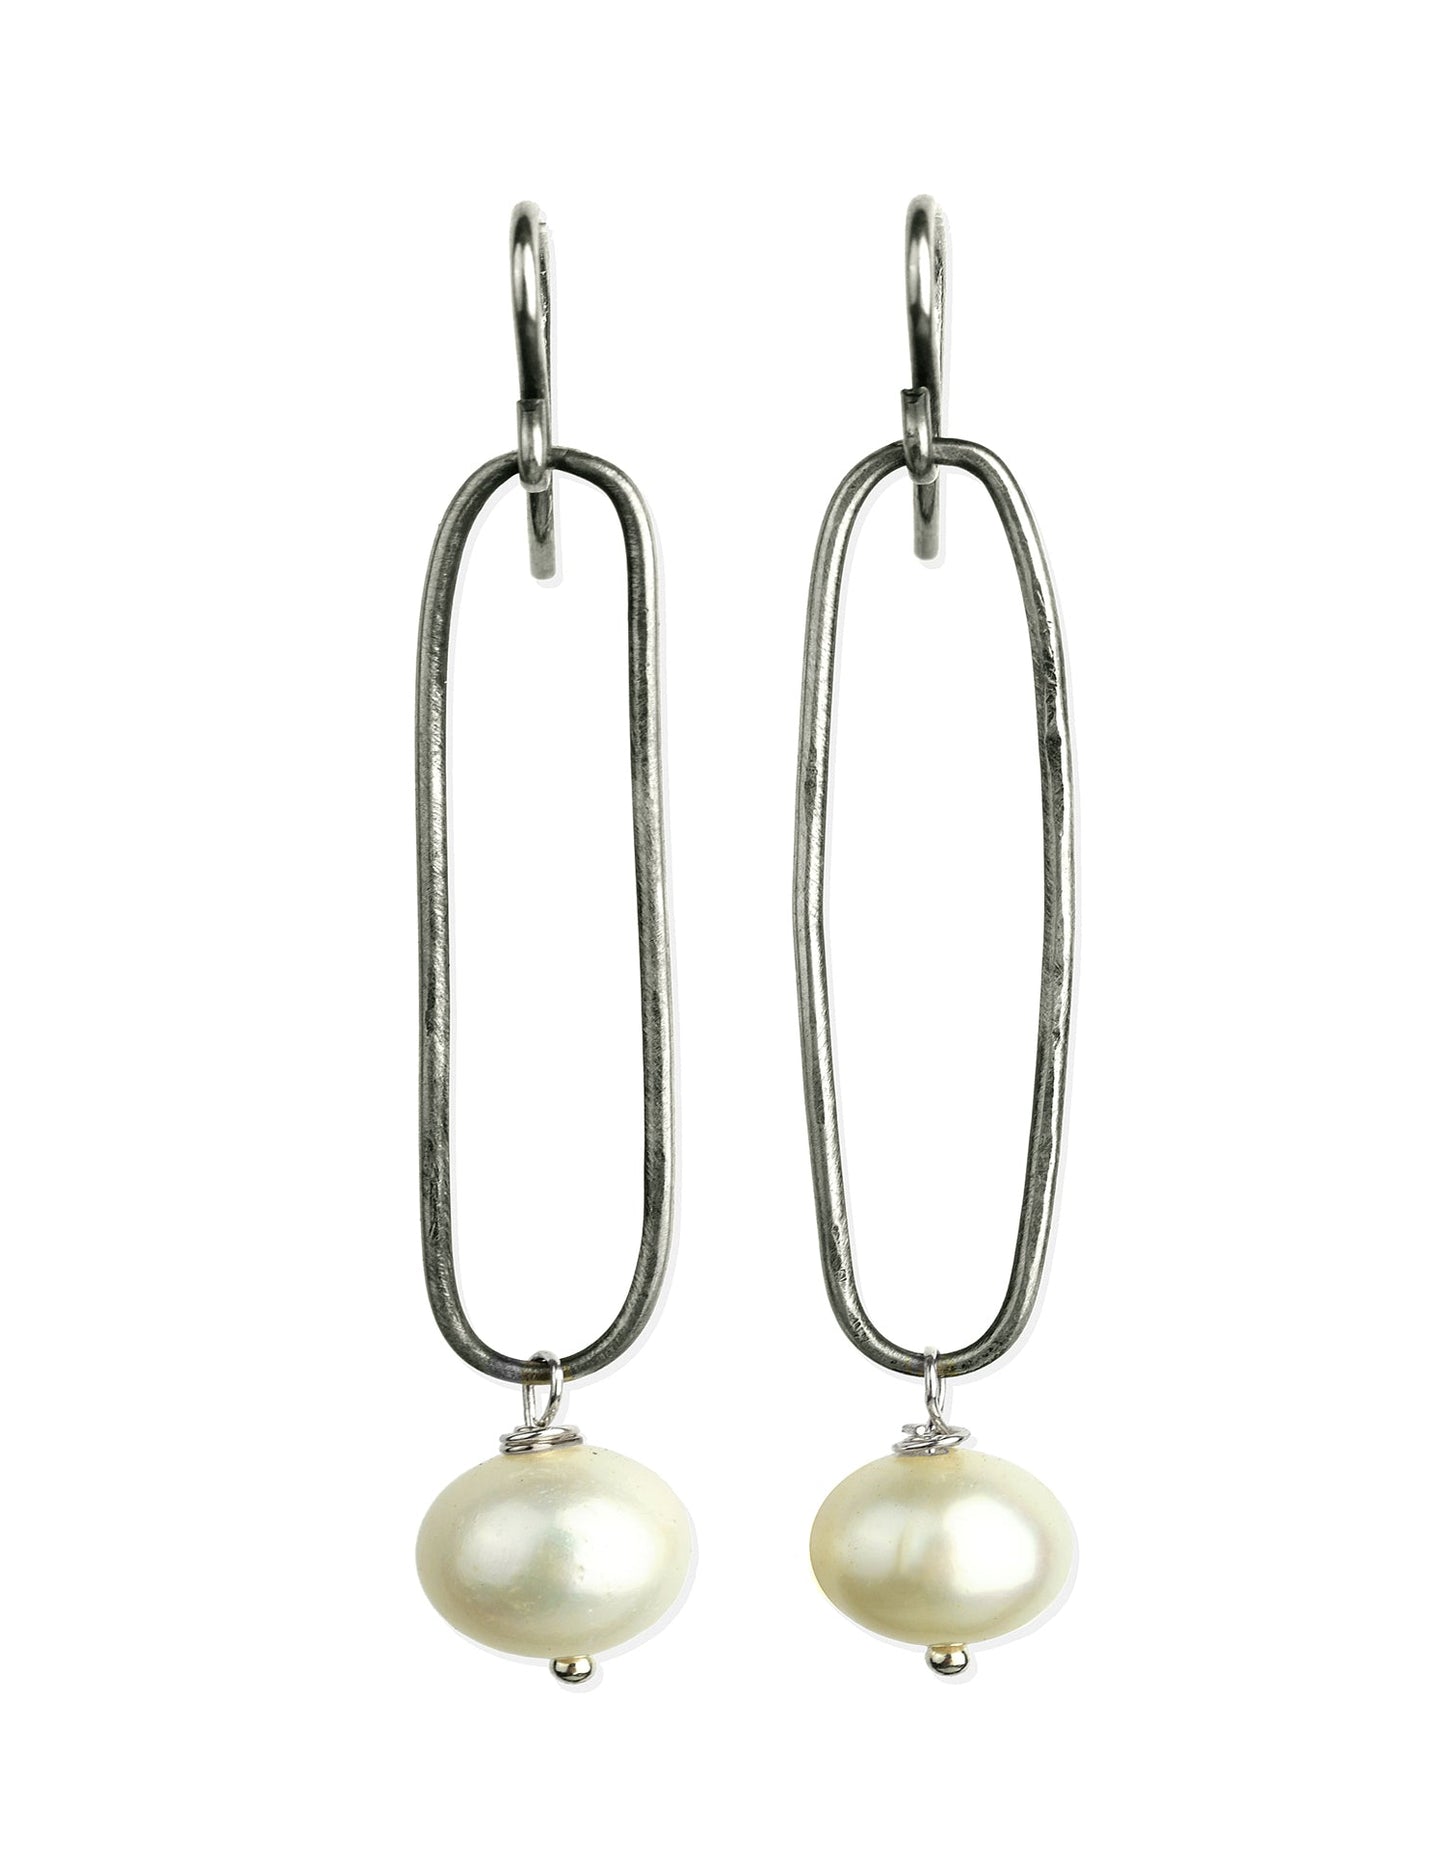 onujewelry.com - Bella Earrings with Natural Pearls created by Donna Silvestri, On U Jewelry, Richmond, VA